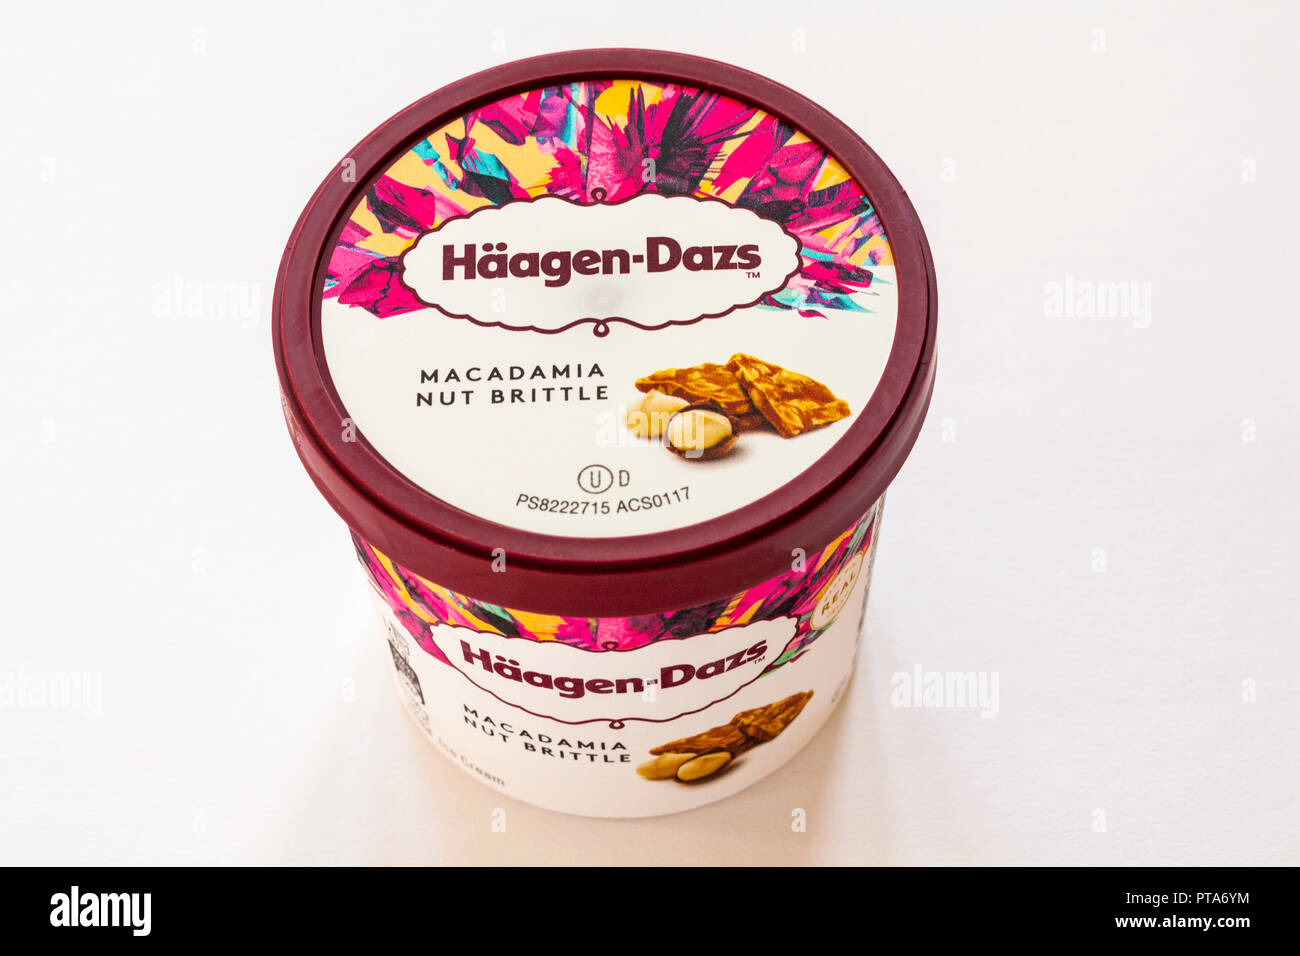 Tub of Haagen-Dazs Macadamia Nut Brittle ice cream, part of new vanilla collection mini cups isolated on white background Stock Photo